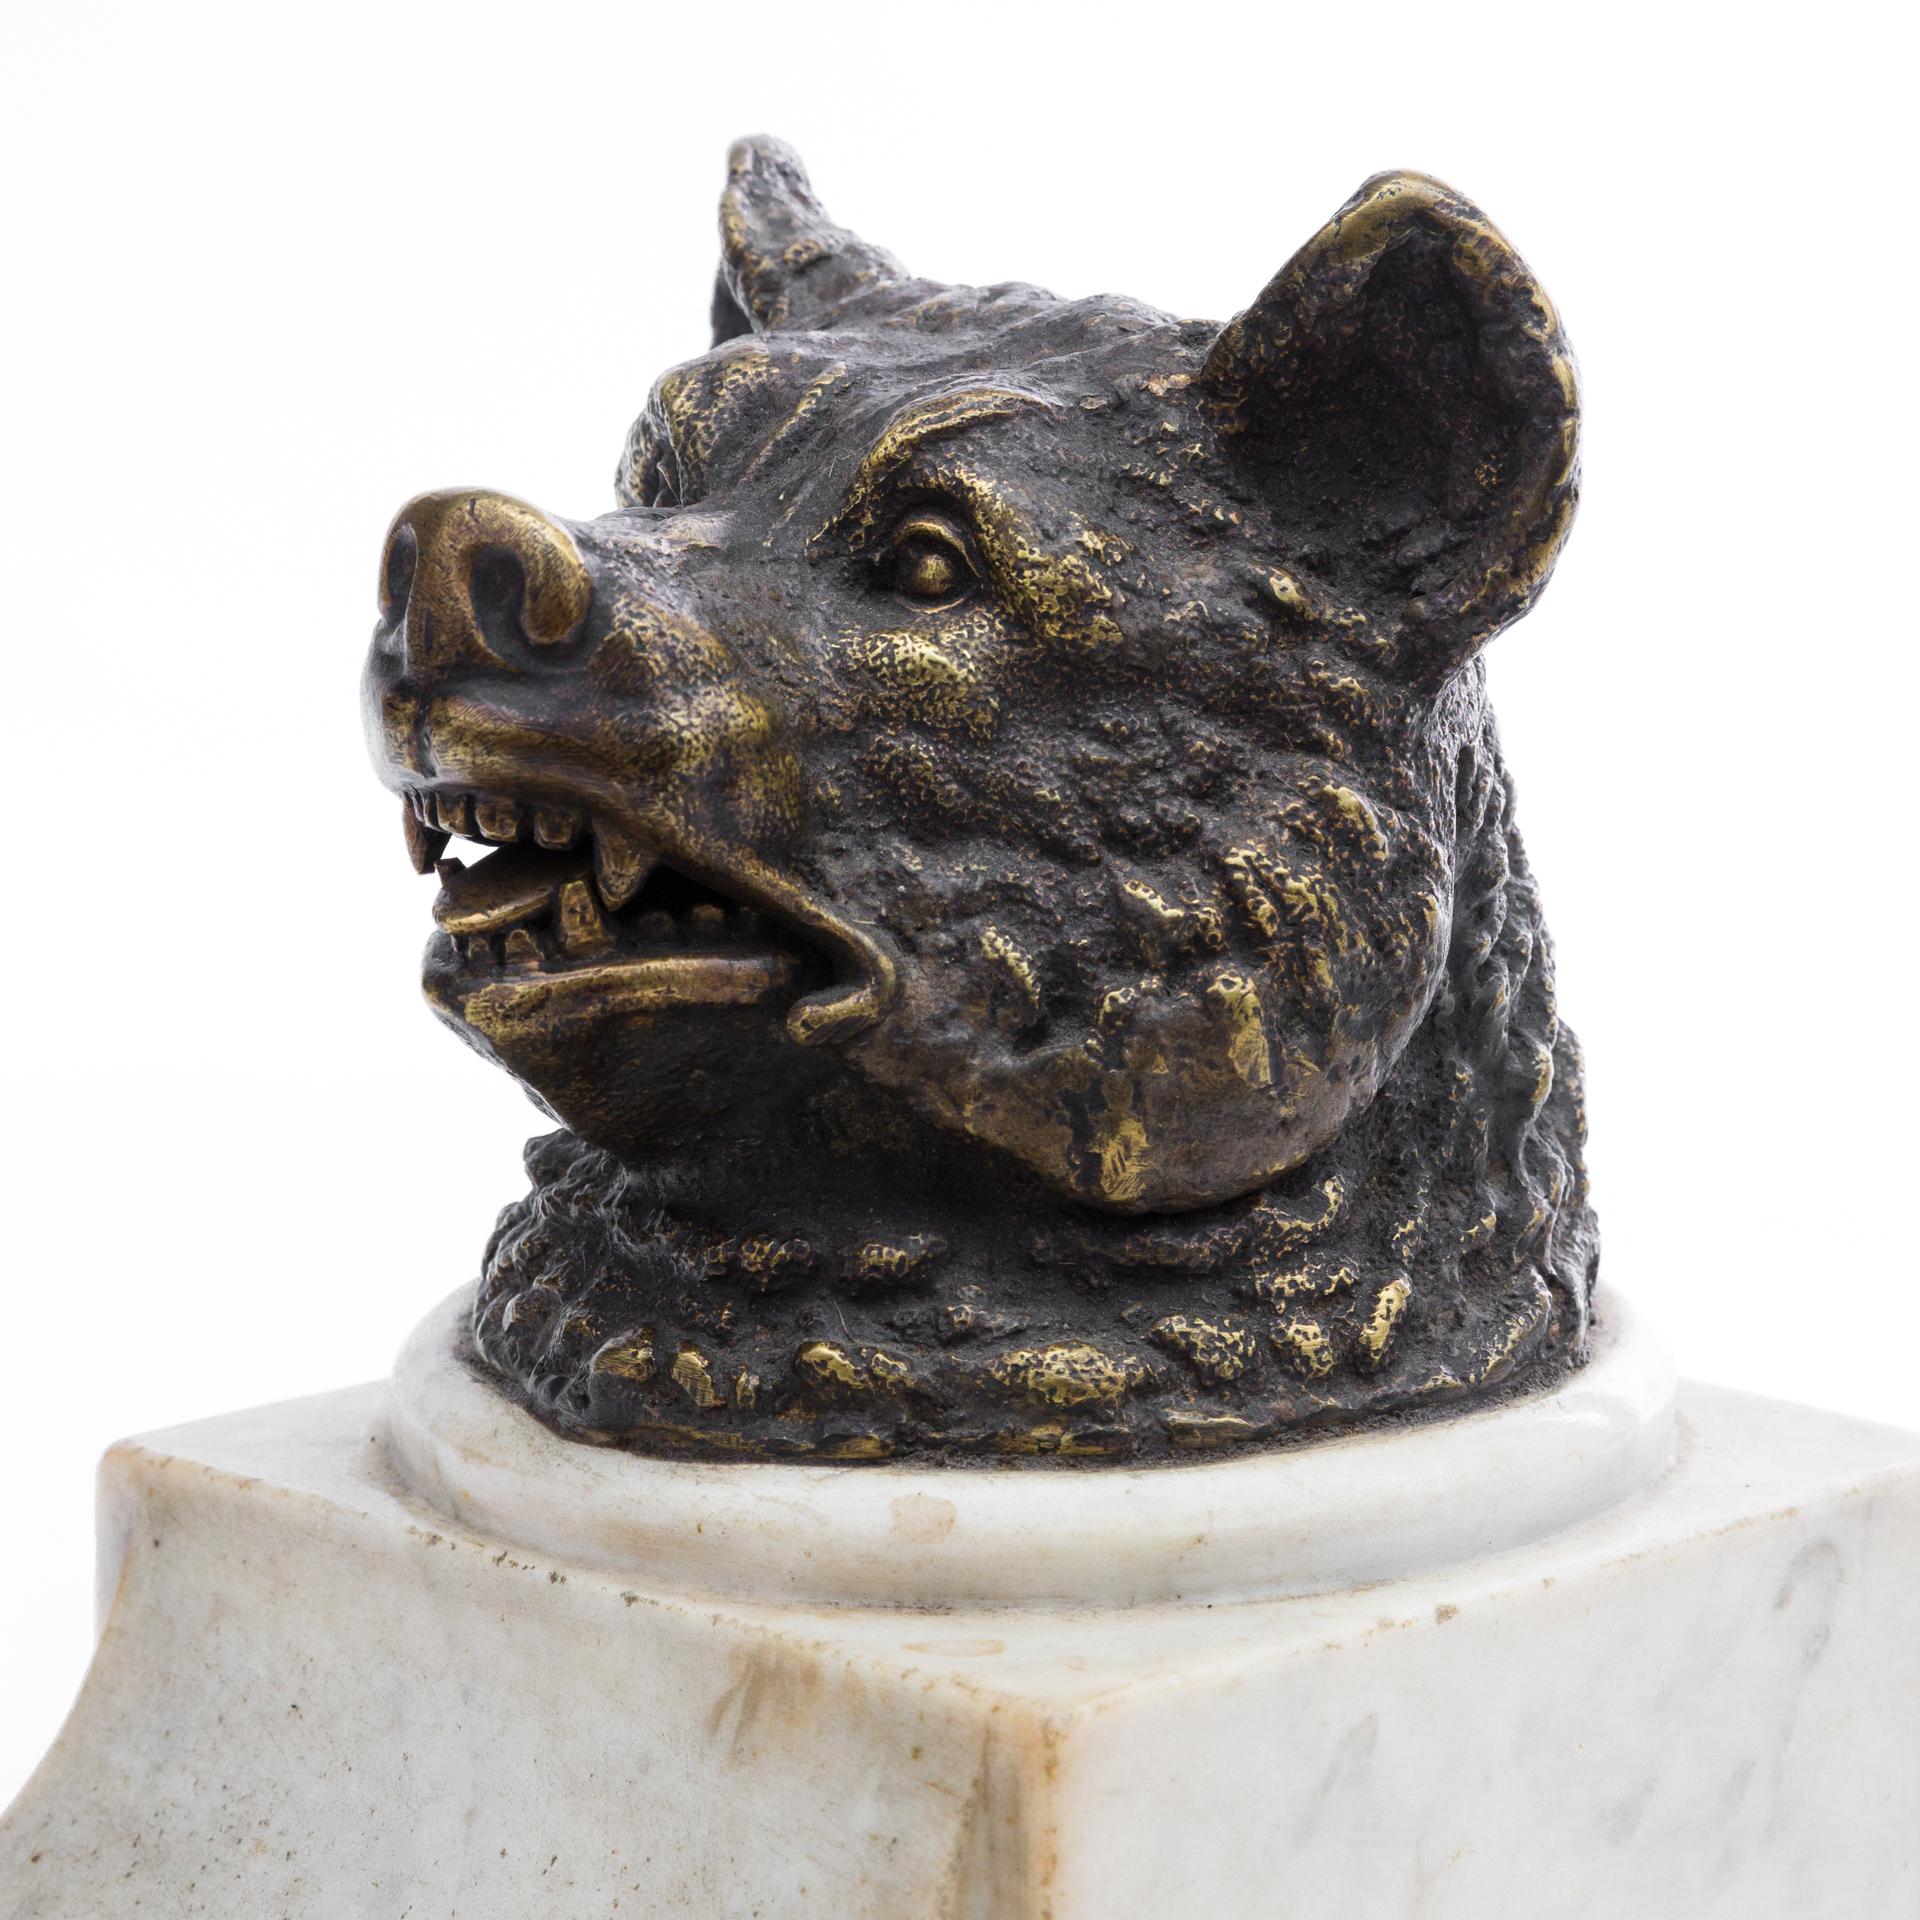 Inkwell in the form of a bear's head, made of bronze, gilded inside, placed on a marble base. Inside, an original, glass ink cartridge. A luxurious, cabinet item made with a precise, costly method.

The item has a very original form. On the high